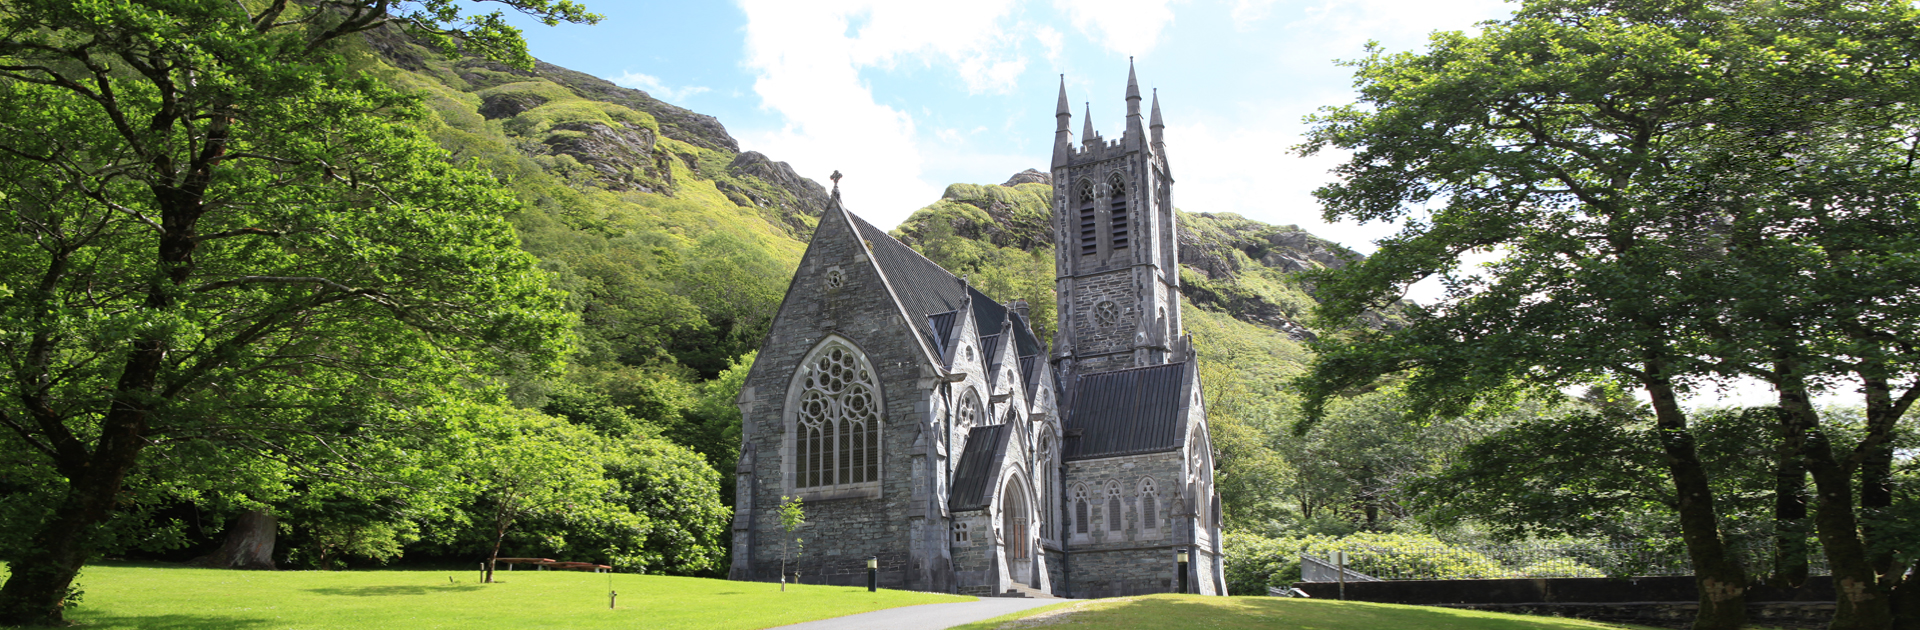 Nice Images Collection: Kylemore Abbey Desktop Wallpapers